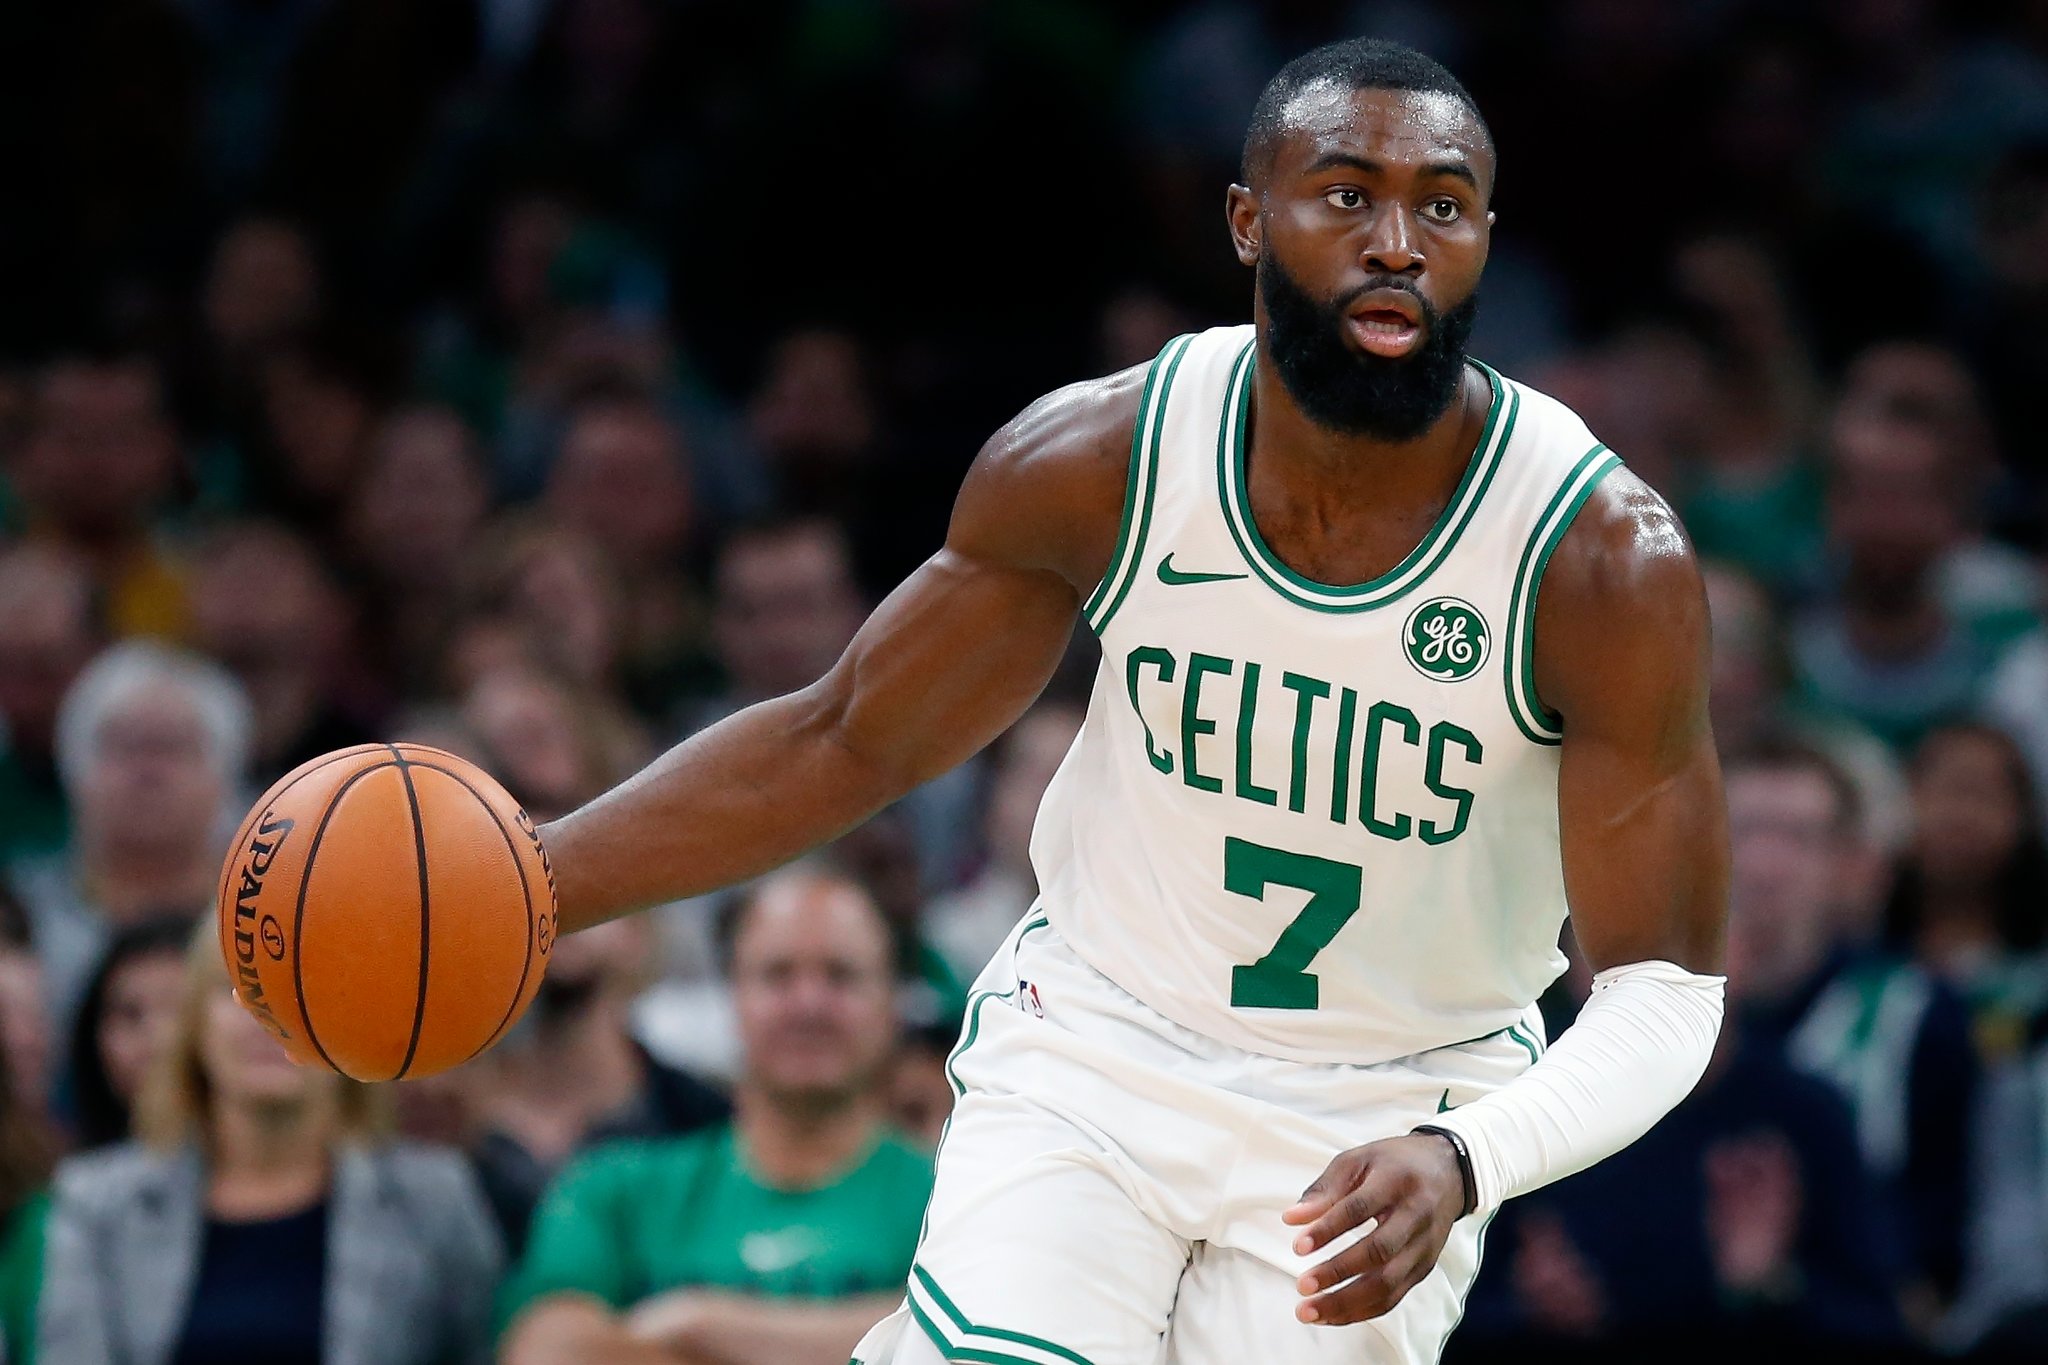 Why Jaylen Brown Thinks Many of Today's Sneakers Are 'Trash'